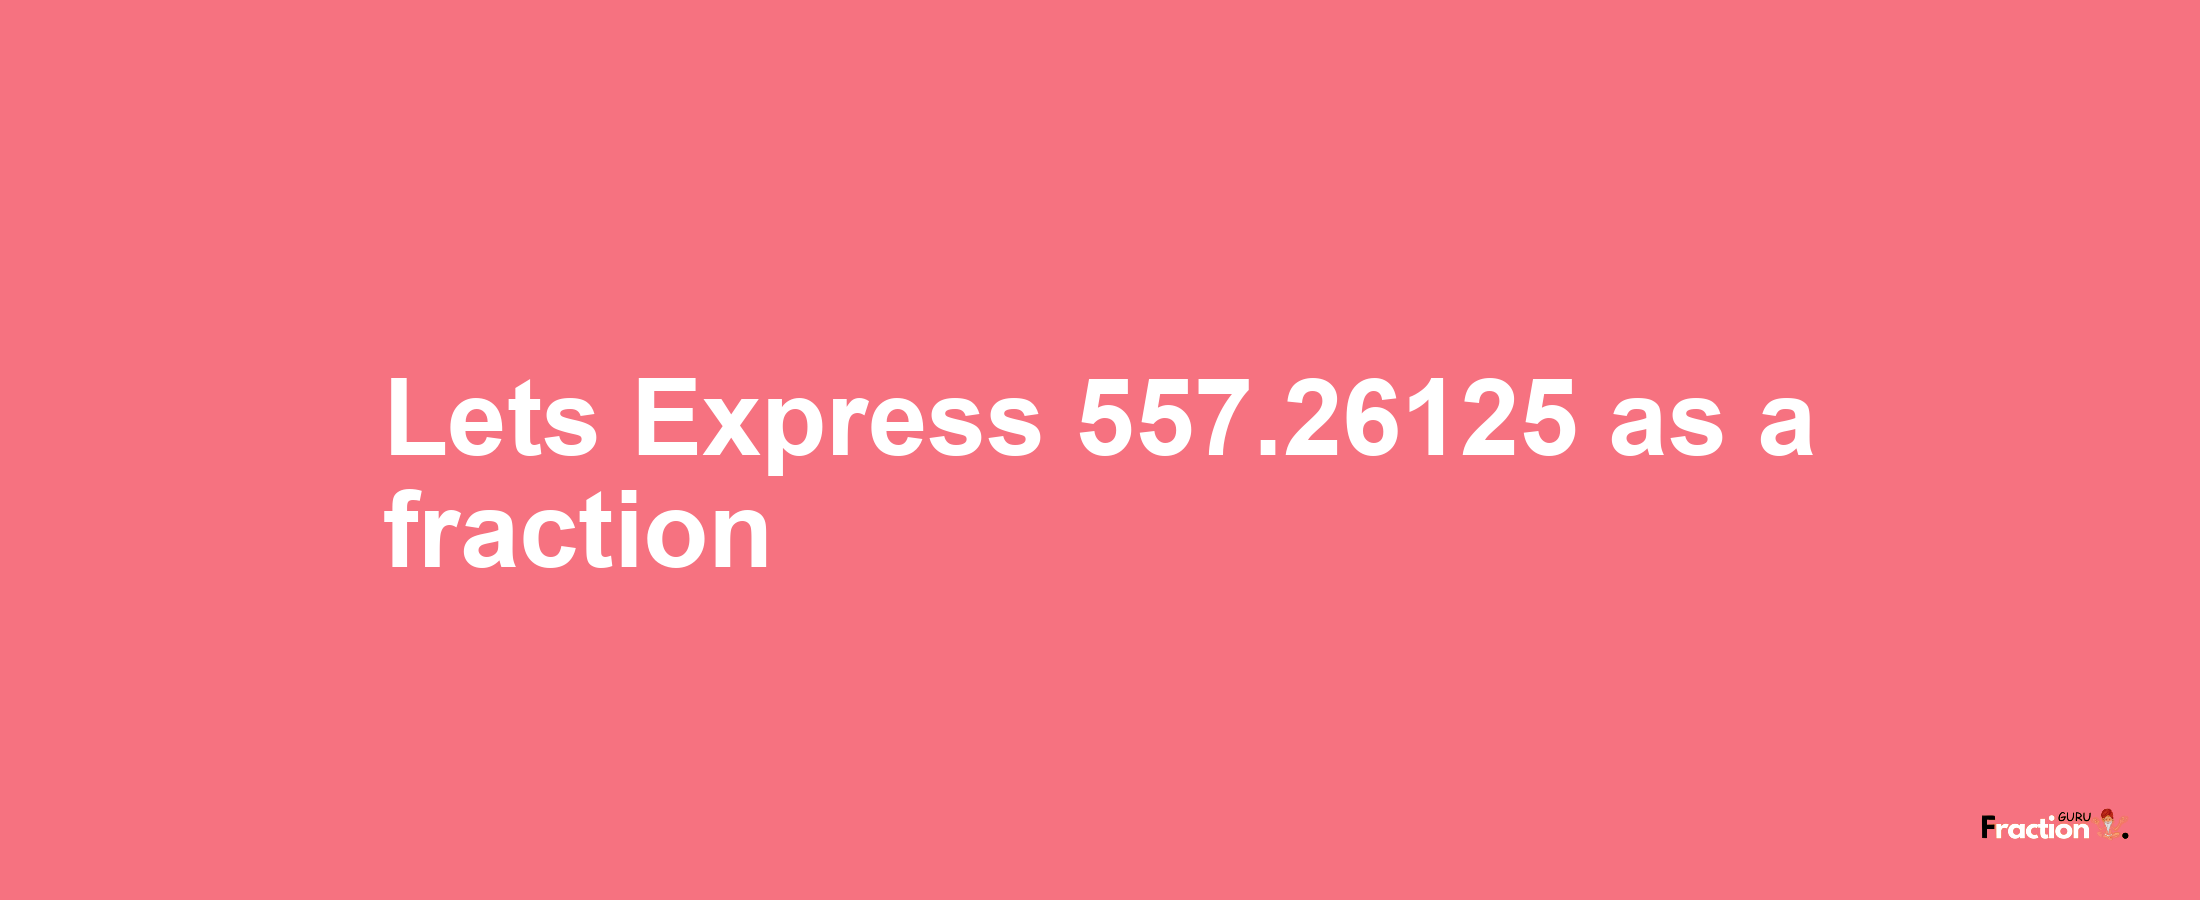 Lets Express 557.26125 as afraction